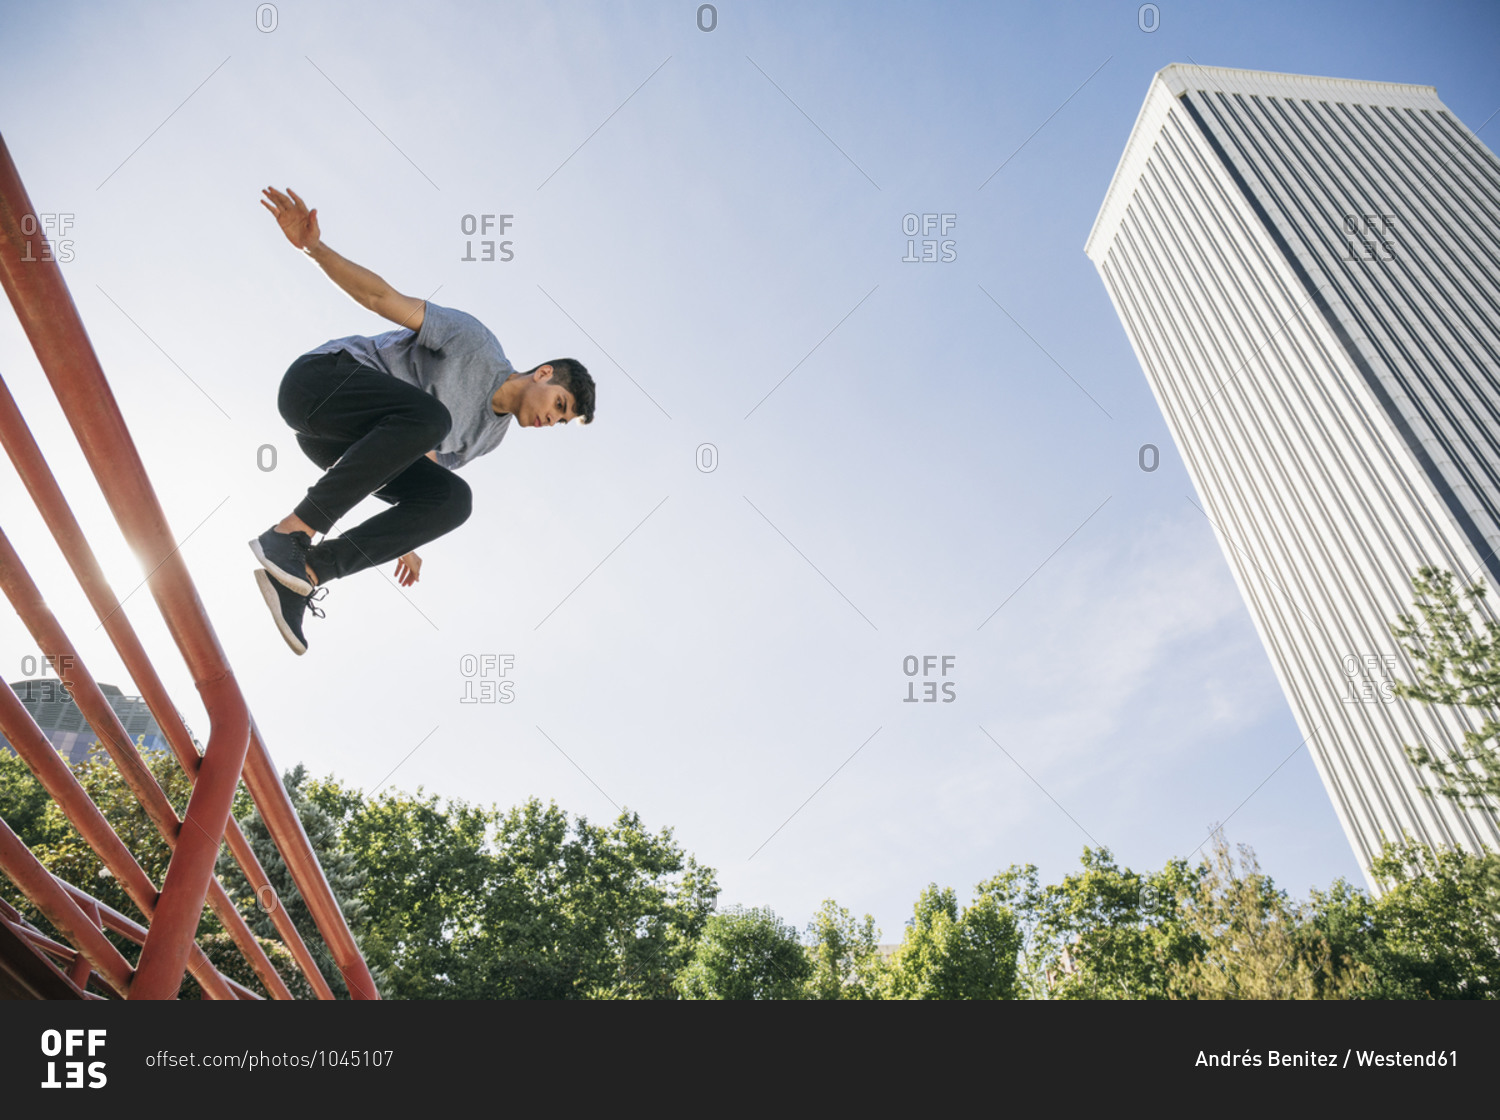 Young man performing parkour over railing against clear sky in city